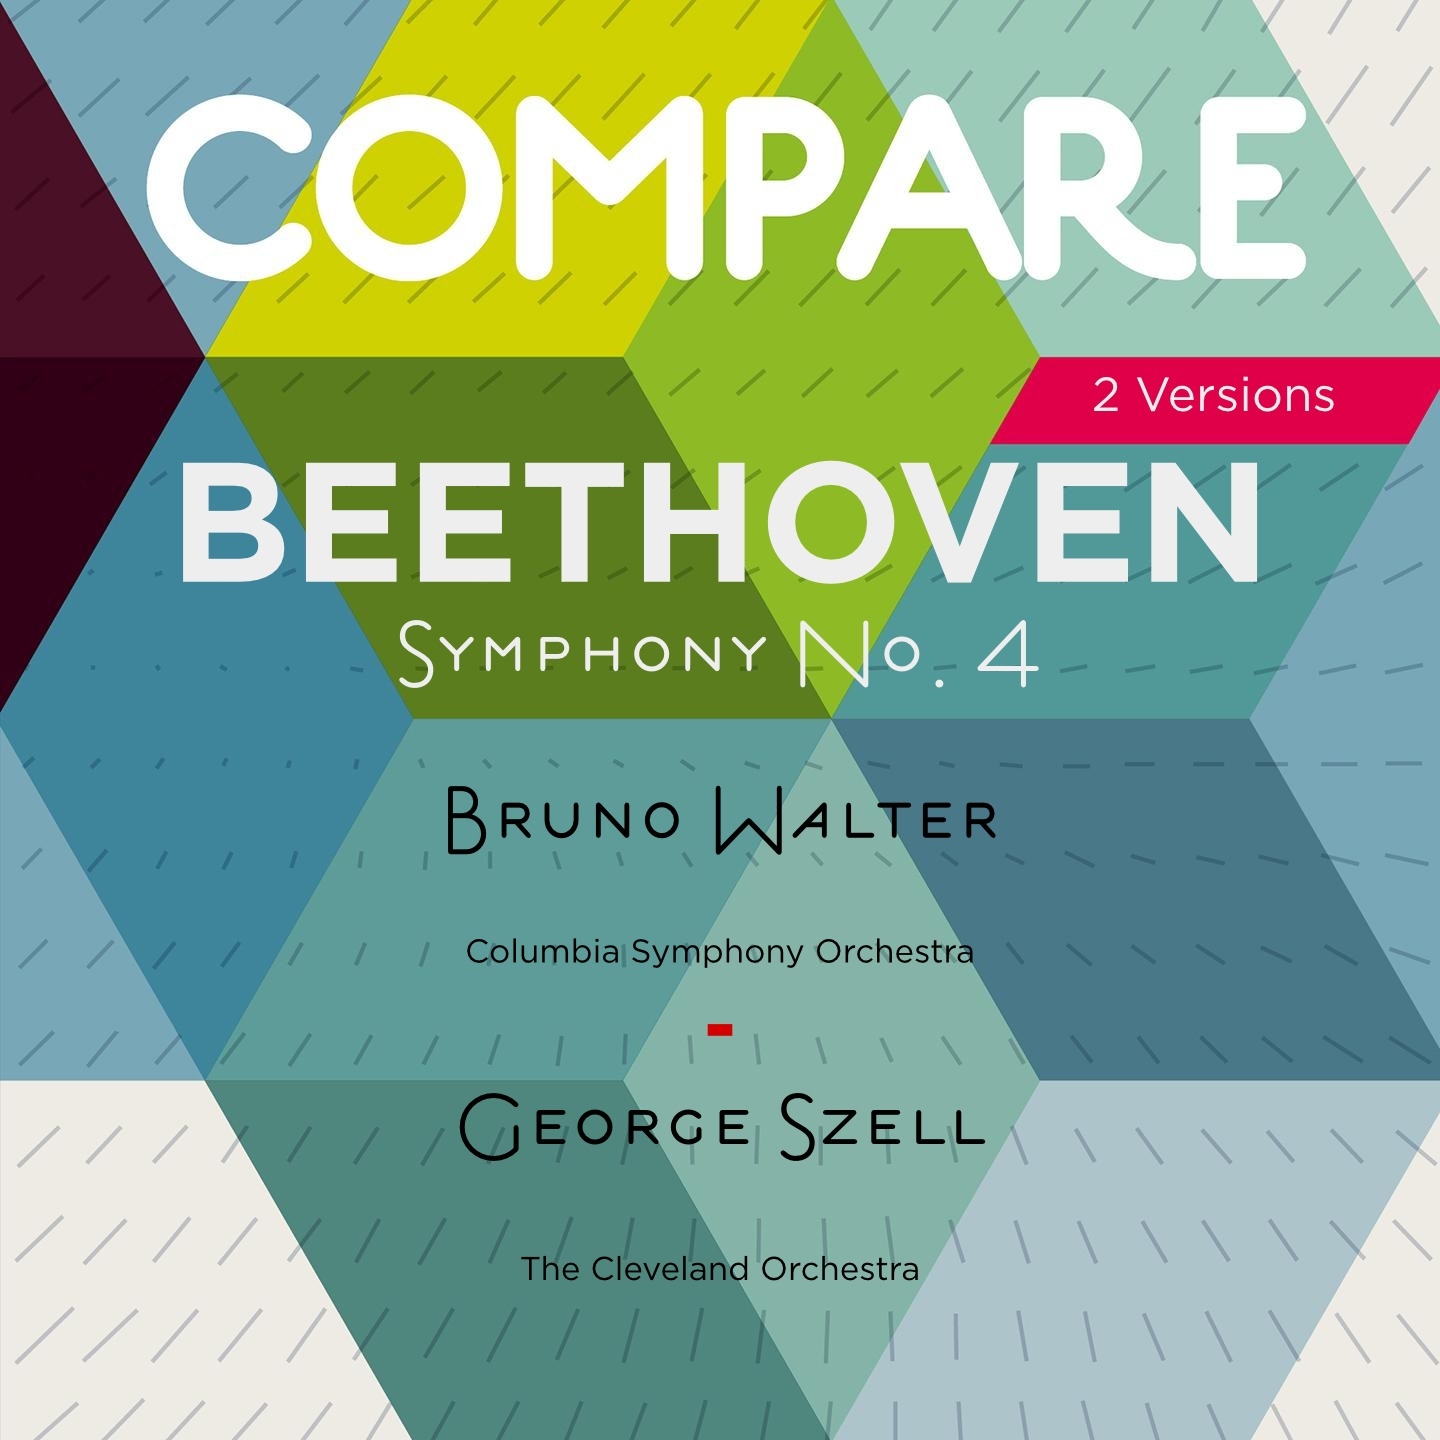 Beethoven: Symphony No. 4, Bruno Walter vs. George Szell (Compare 2 Versions)